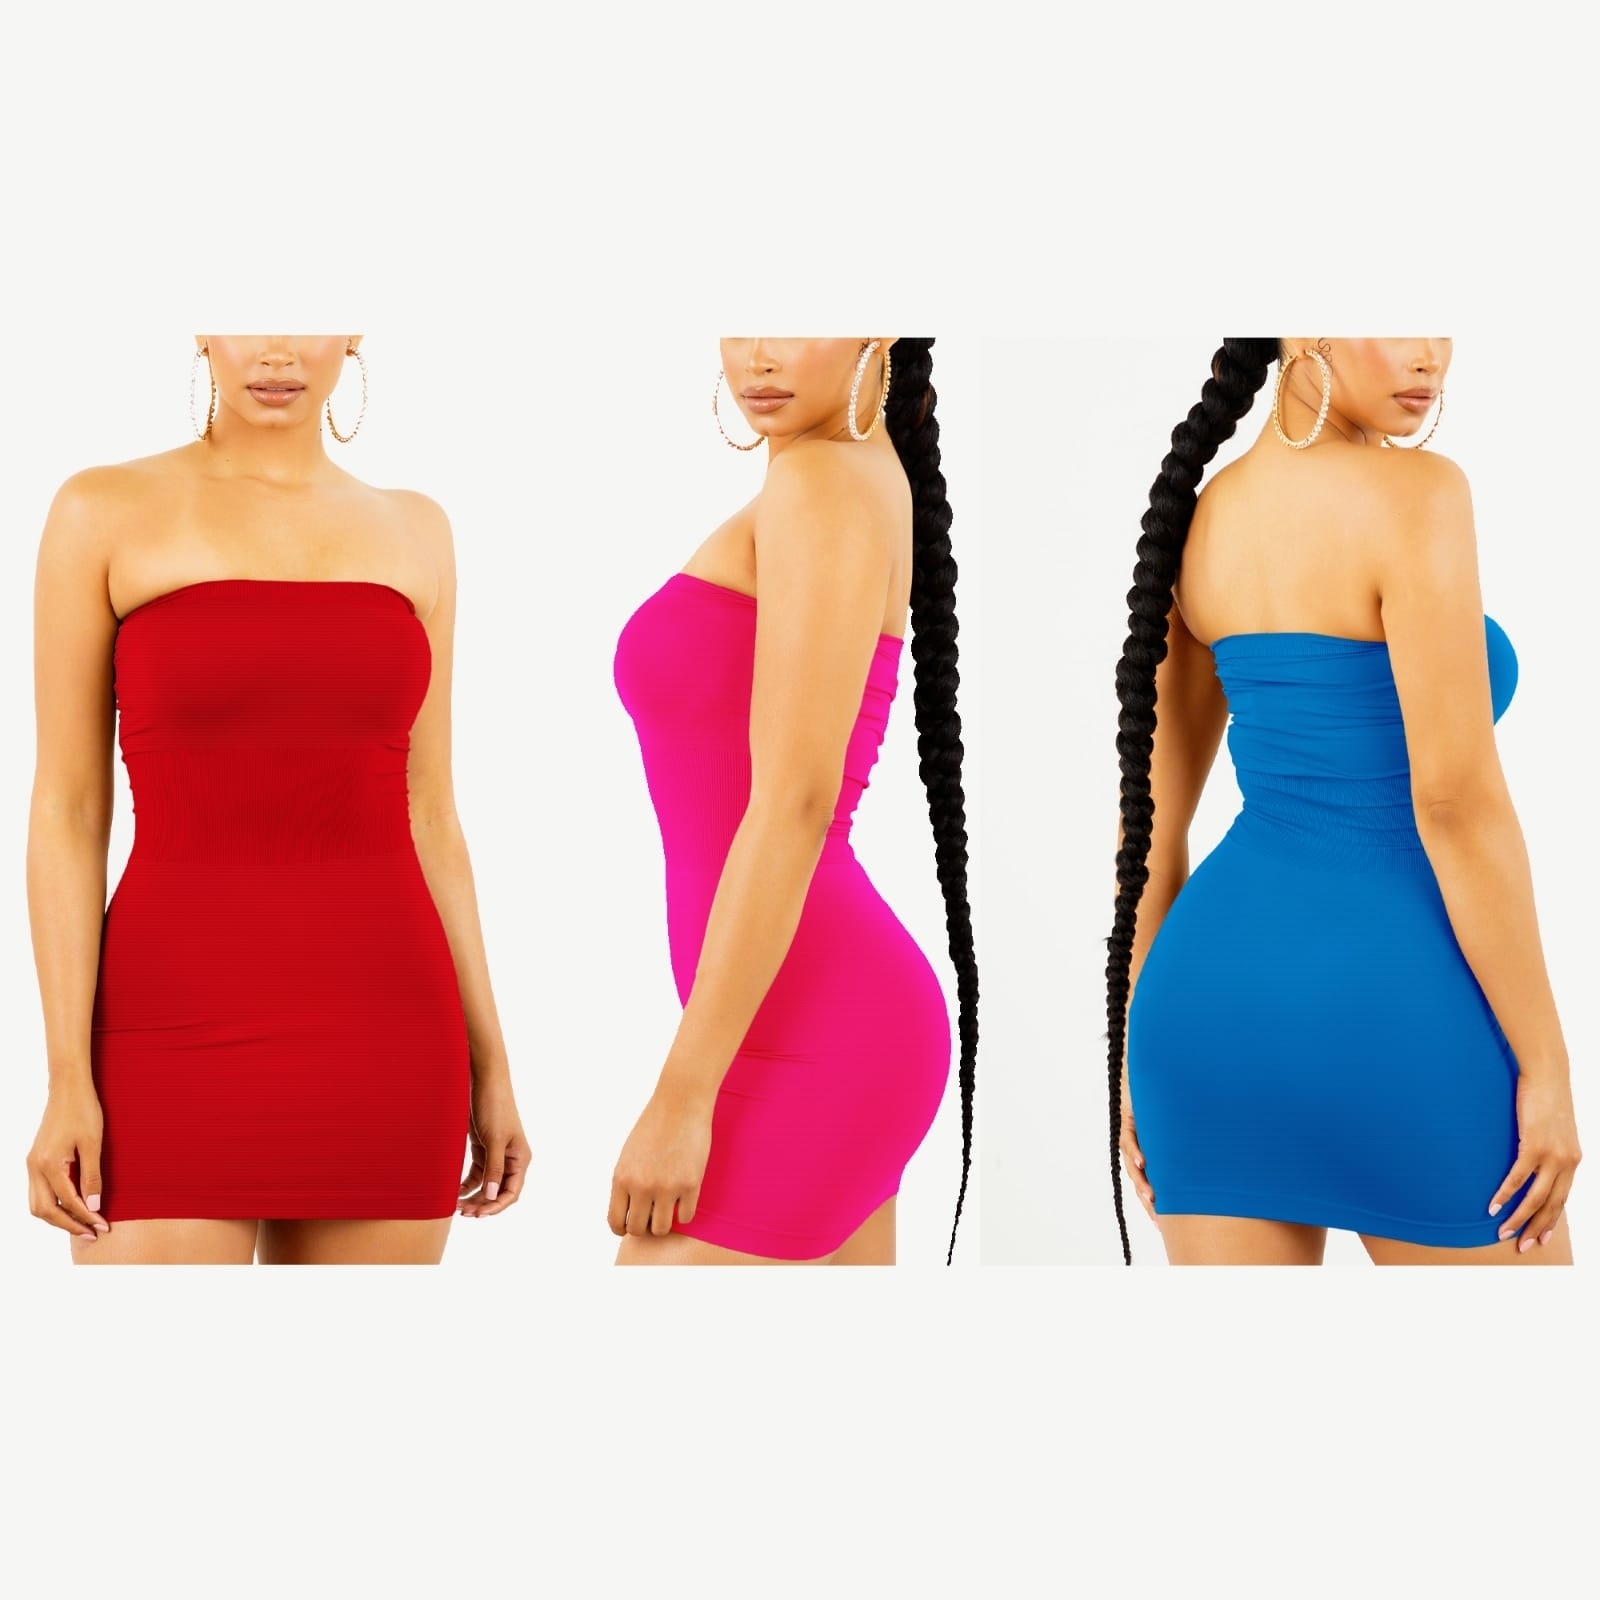 2-Pack Women's Strapless Stretchy Tight Fit Seamless Body Con Mini Tube Top Dress - RED, M